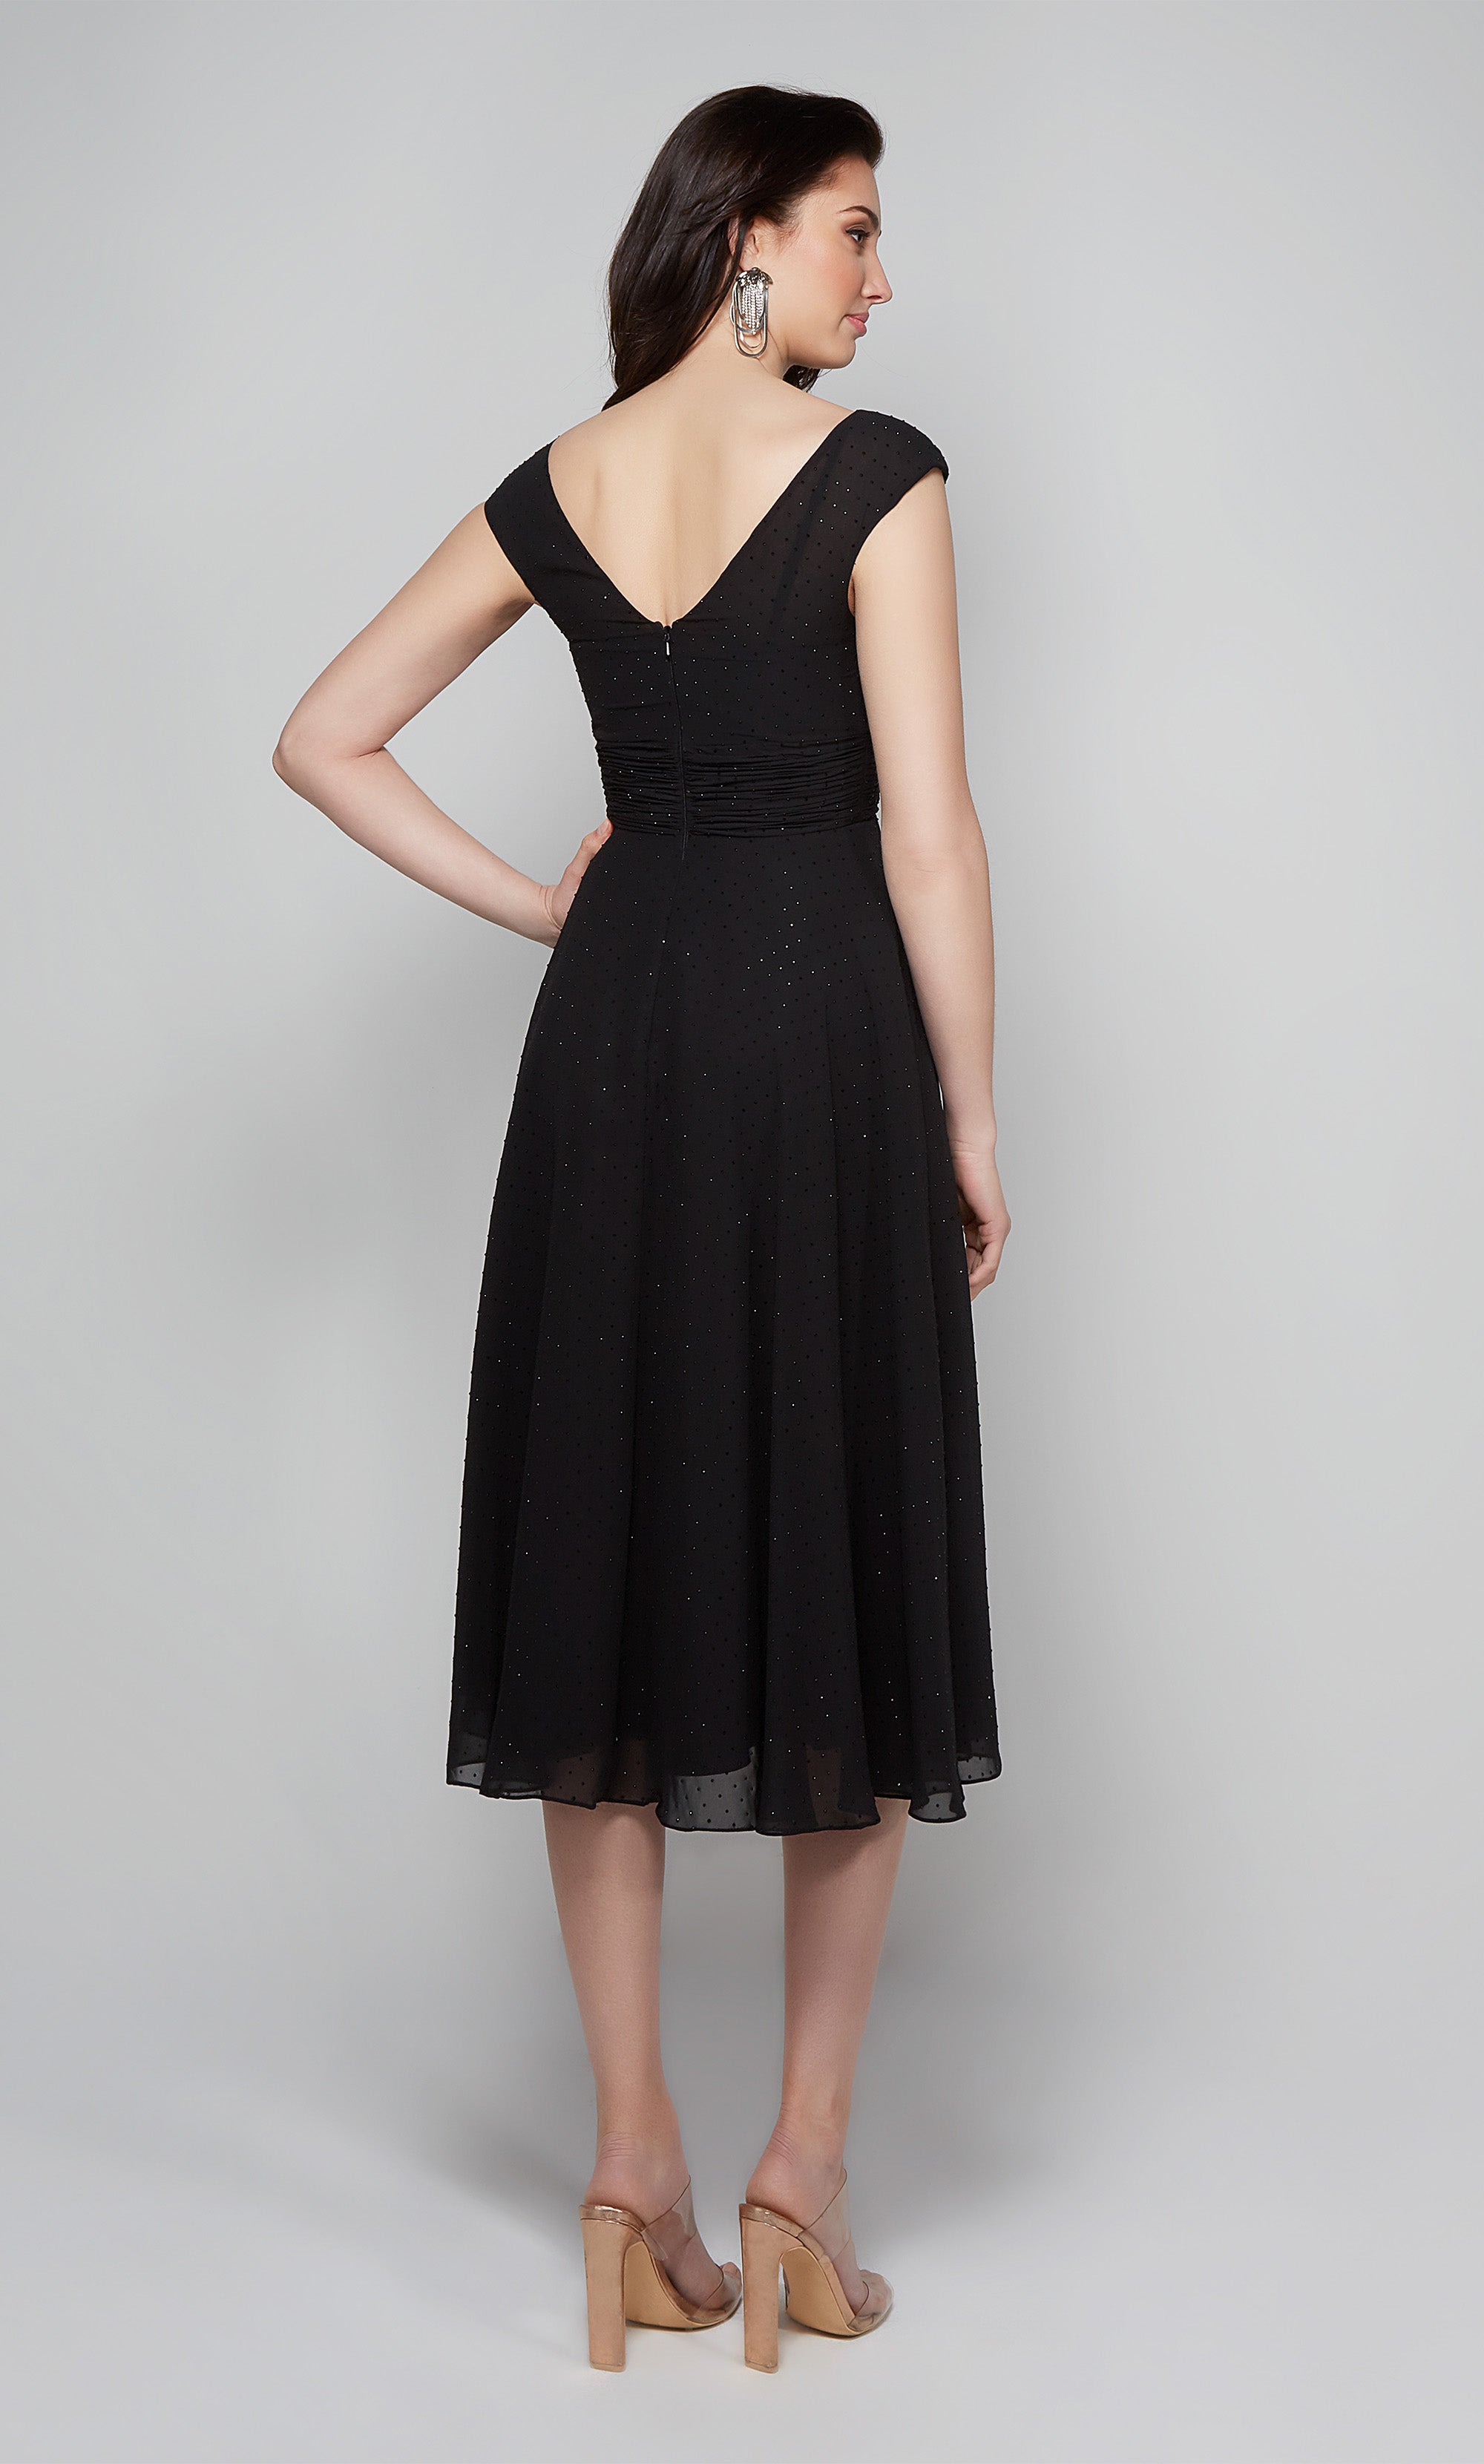 Black chiffon midi dress with cap sleeves and an A-line skirt. Color-SWATCH_27629__BLACK